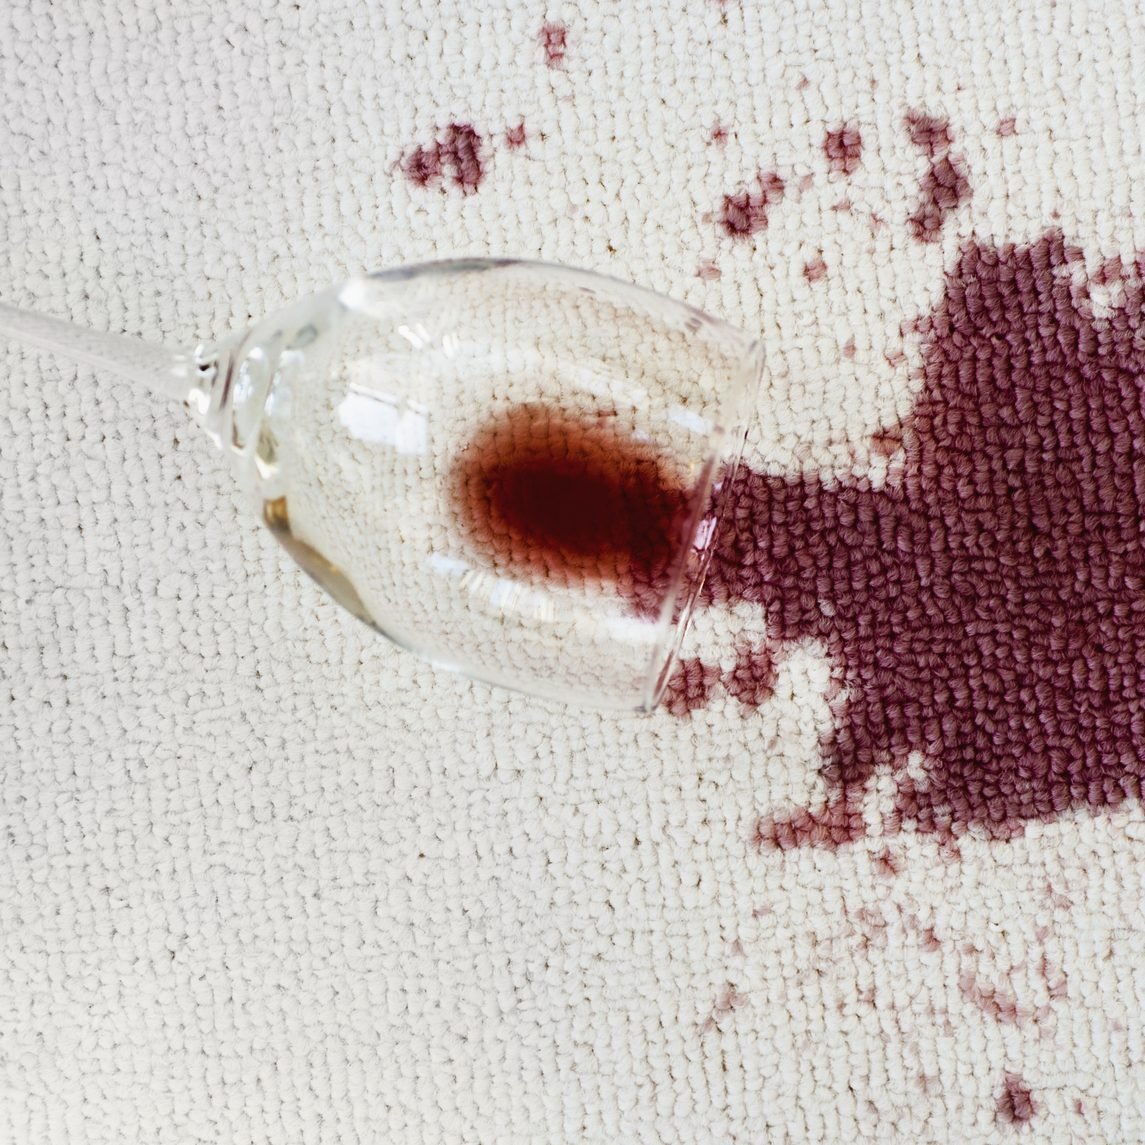 Close up of spoiled red wine on white background